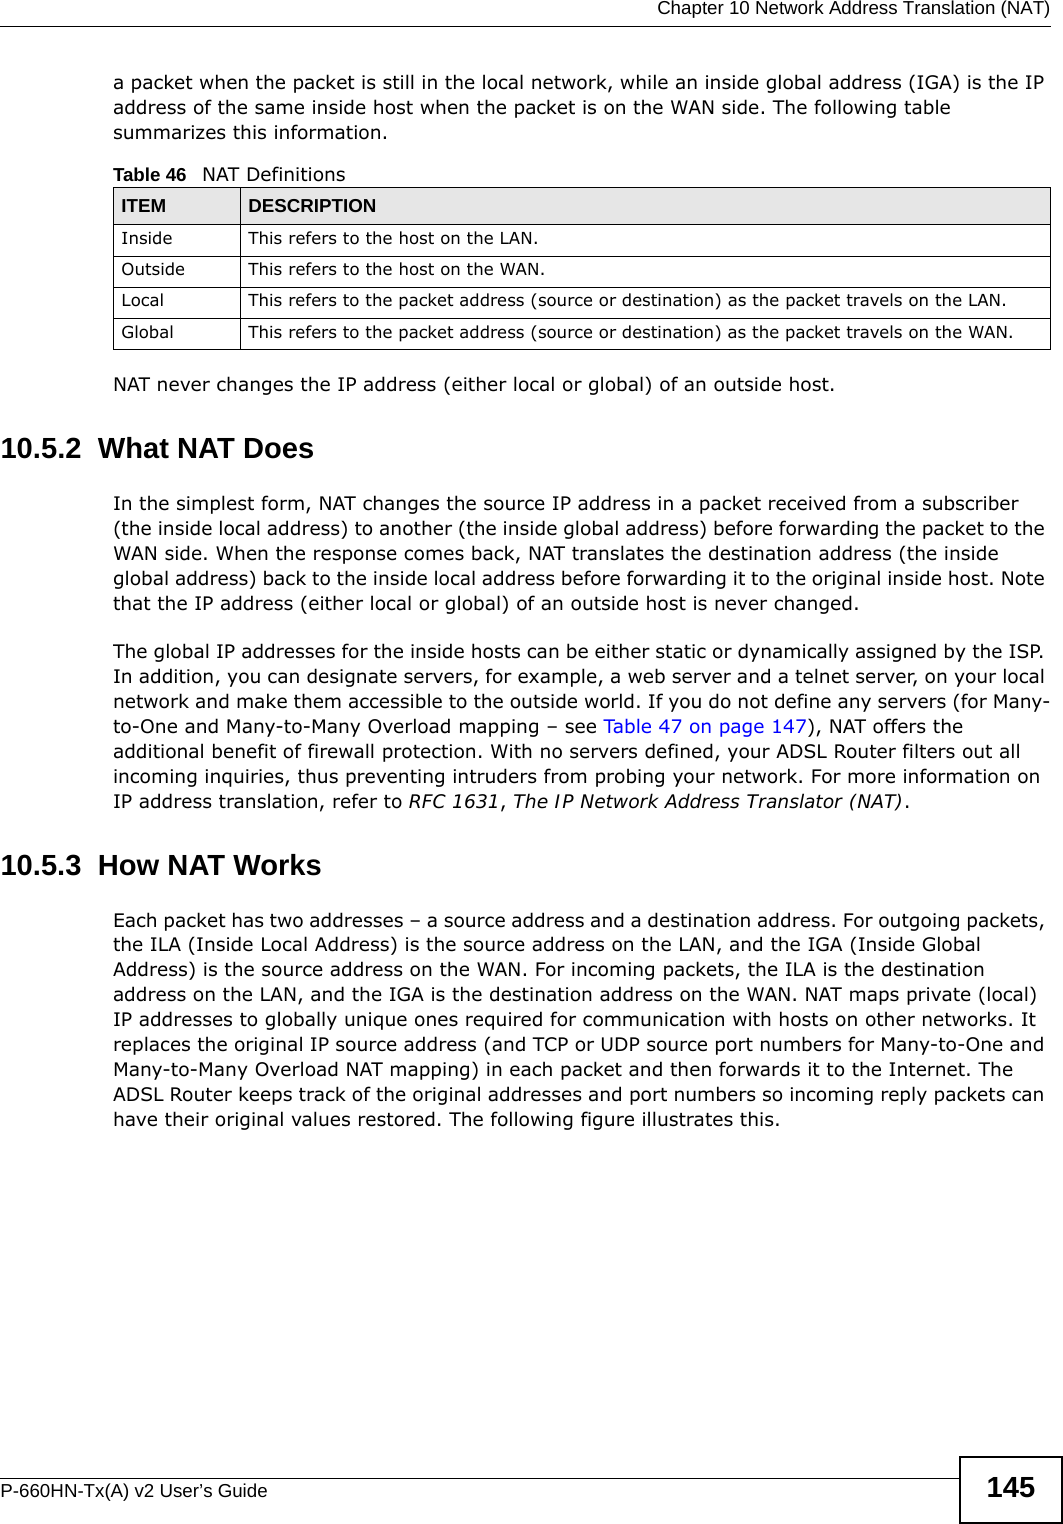  Chapter 10 Network Address Translation (NAT)P-660HN-Tx(A) v2 User’s Guide 145a packet when the packet is still in the local network, while an inside global address (IGA) is the IP address of the same inside host when the packet is on the WAN side. The following table summarizes this information.NAT never changes the IP address (either local or global) of an outside host.10.5.2  What NAT DoesIn the simplest form, NAT changes the source IP address in a packet received from a subscriber (the inside local address) to another (the inside global address) before forwarding the packet to the WAN side. When the response comes back, NAT translates the destination address (the inside global address) back to the inside local address before forwarding it to the original inside host. Note that the IP address (either local or global) of an outside host is never changed.The global IP addresses for the inside hosts can be either static or dynamically assigned by the ISP. In addition, you can designate servers, for example, a web server and a telnet server, on your local network and make them accessible to the outside world. If you do not define any servers (for Many-to-One and Many-to-Many Overload mapping – see Table 47 on page 147), NAT offers the additional benefit of firewall protection. With no servers defined, your ADSL Router filters out all incoming inquiries, thus preventing intruders from probing your network. For more information on IP address translation, refer to RFC 1631, The IP Network Address Translator (NAT).10.5.3  How NAT WorksEach packet has two addresses – a source address and a destination address. For outgoing packets, the ILA (Inside Local Address) is the source address on the LAN, and the IGA (Inside Global Address) is the source address on the WAN. For incoming packets, the ILA is the destination address on the LAN, and the IGA is the destination address on the WAN. NAT maps private (local) IP addresses to globally unique ones required for communication with hosts on other networks. It replaces the original IP source address (and TCP or UDP source port numbers for Many-to-One and Many-to-Many Overload NAT mapping) in each packet and then forwards it to the Internet. The ADSL Router keeps track of the original addresses and port numbers so incoming reply packets can have their original values restored. The following figure illustrates this.Table 46   NAT DefinitionsITEM DESCRIPTIONInside This refers to the host on the LAN.Outside This refers to the host on the WAN.Local This refers to the packet address (source or destination) as the packet travels on the LAN.Global This refers to the packet address (source or destination) as the packet travels on the WAN.